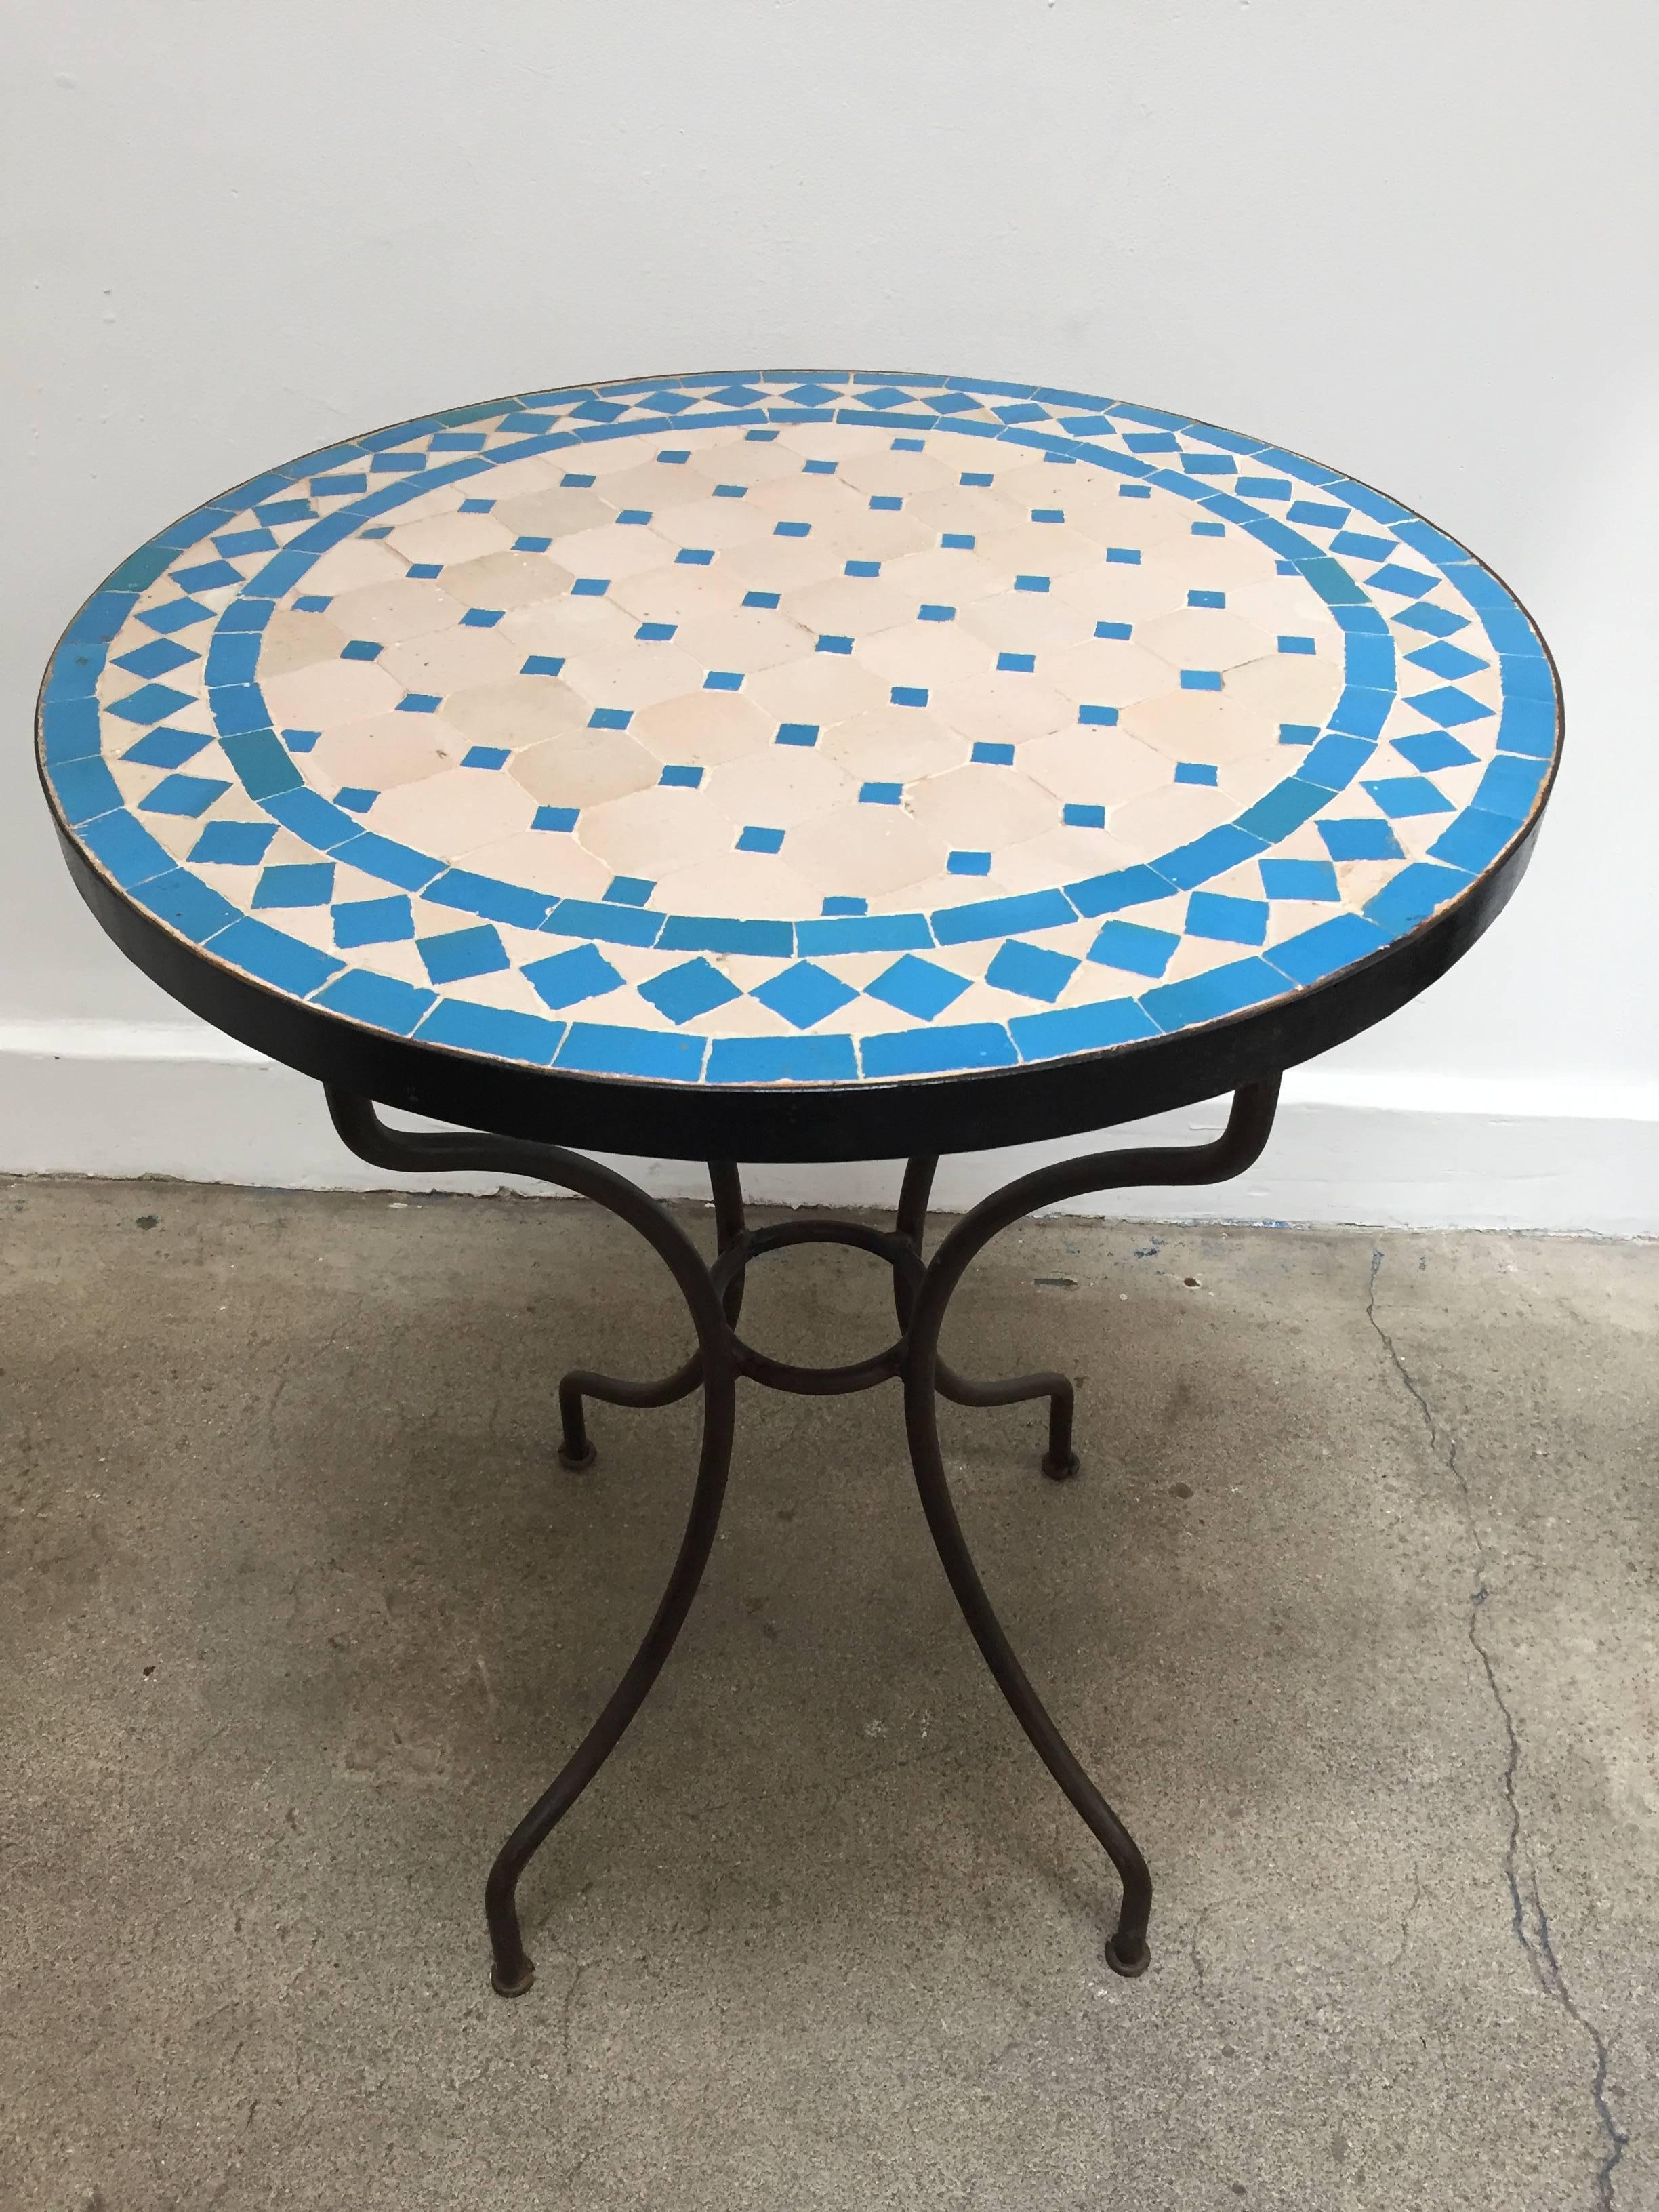 Moroccan mosaic tile bistro table on iron base. 
Handmade by expert artisans in Fez, Morocco using reclaimed old glazed blue and tan tiles inlaid in concrete using reclaimed old glazed tiles and making beautiful geometrical designs, colors are